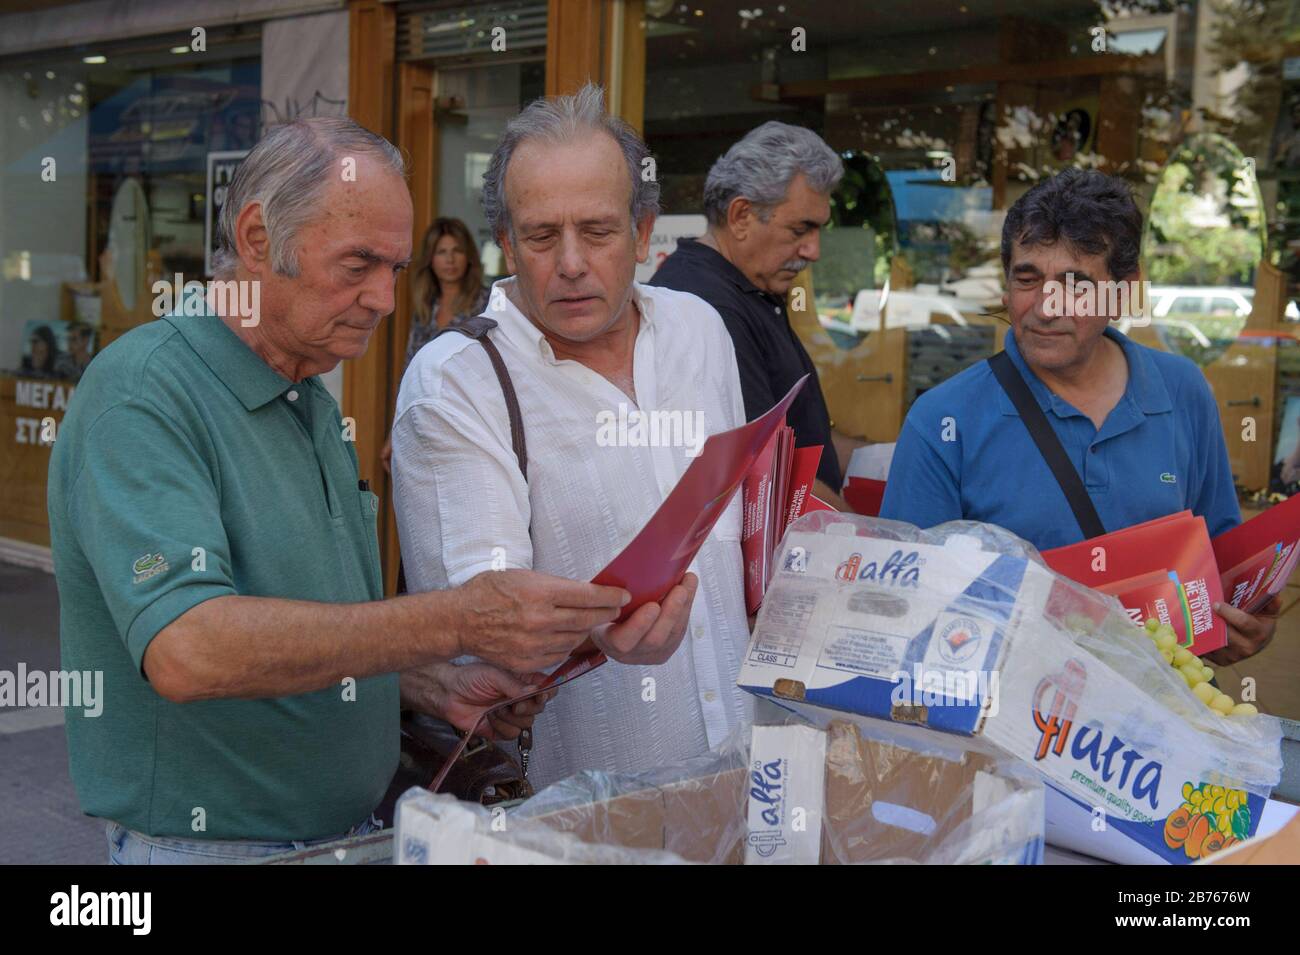 18.09.2015, Thessaloniki / Greece. Election campaign for the parliamentary elections in Greece in September 2015, Syriza party members and parliamentary candidates in the street election campaign. [automated translation] Stock Photo